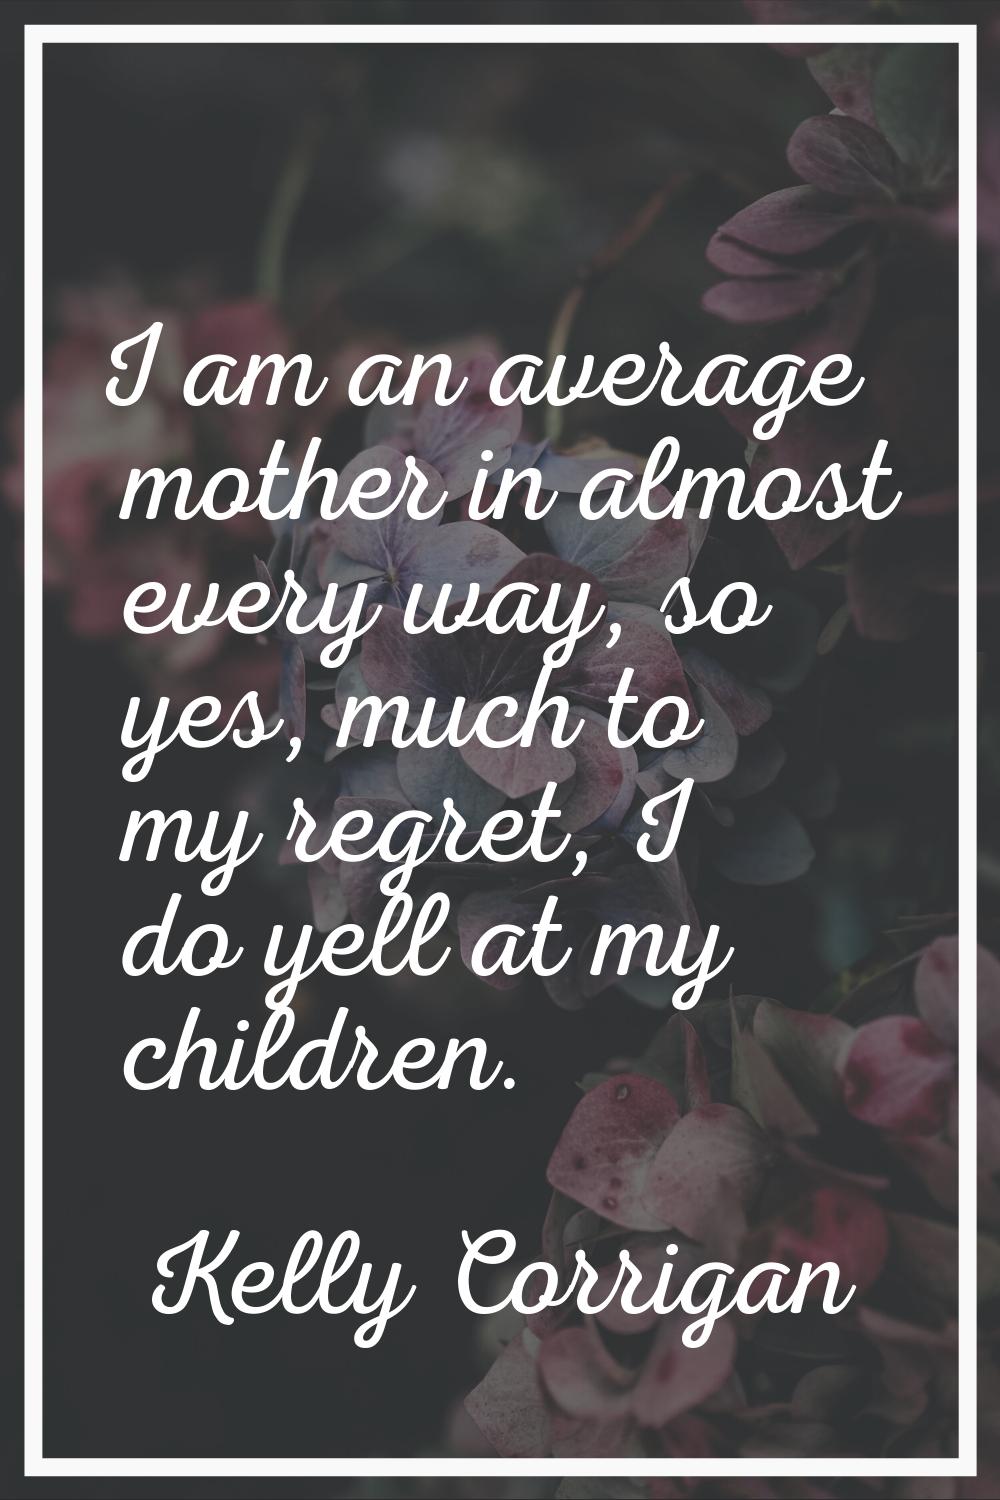 I am an average mother in almost every way, so yes, much to my regret, I do yell at my children.